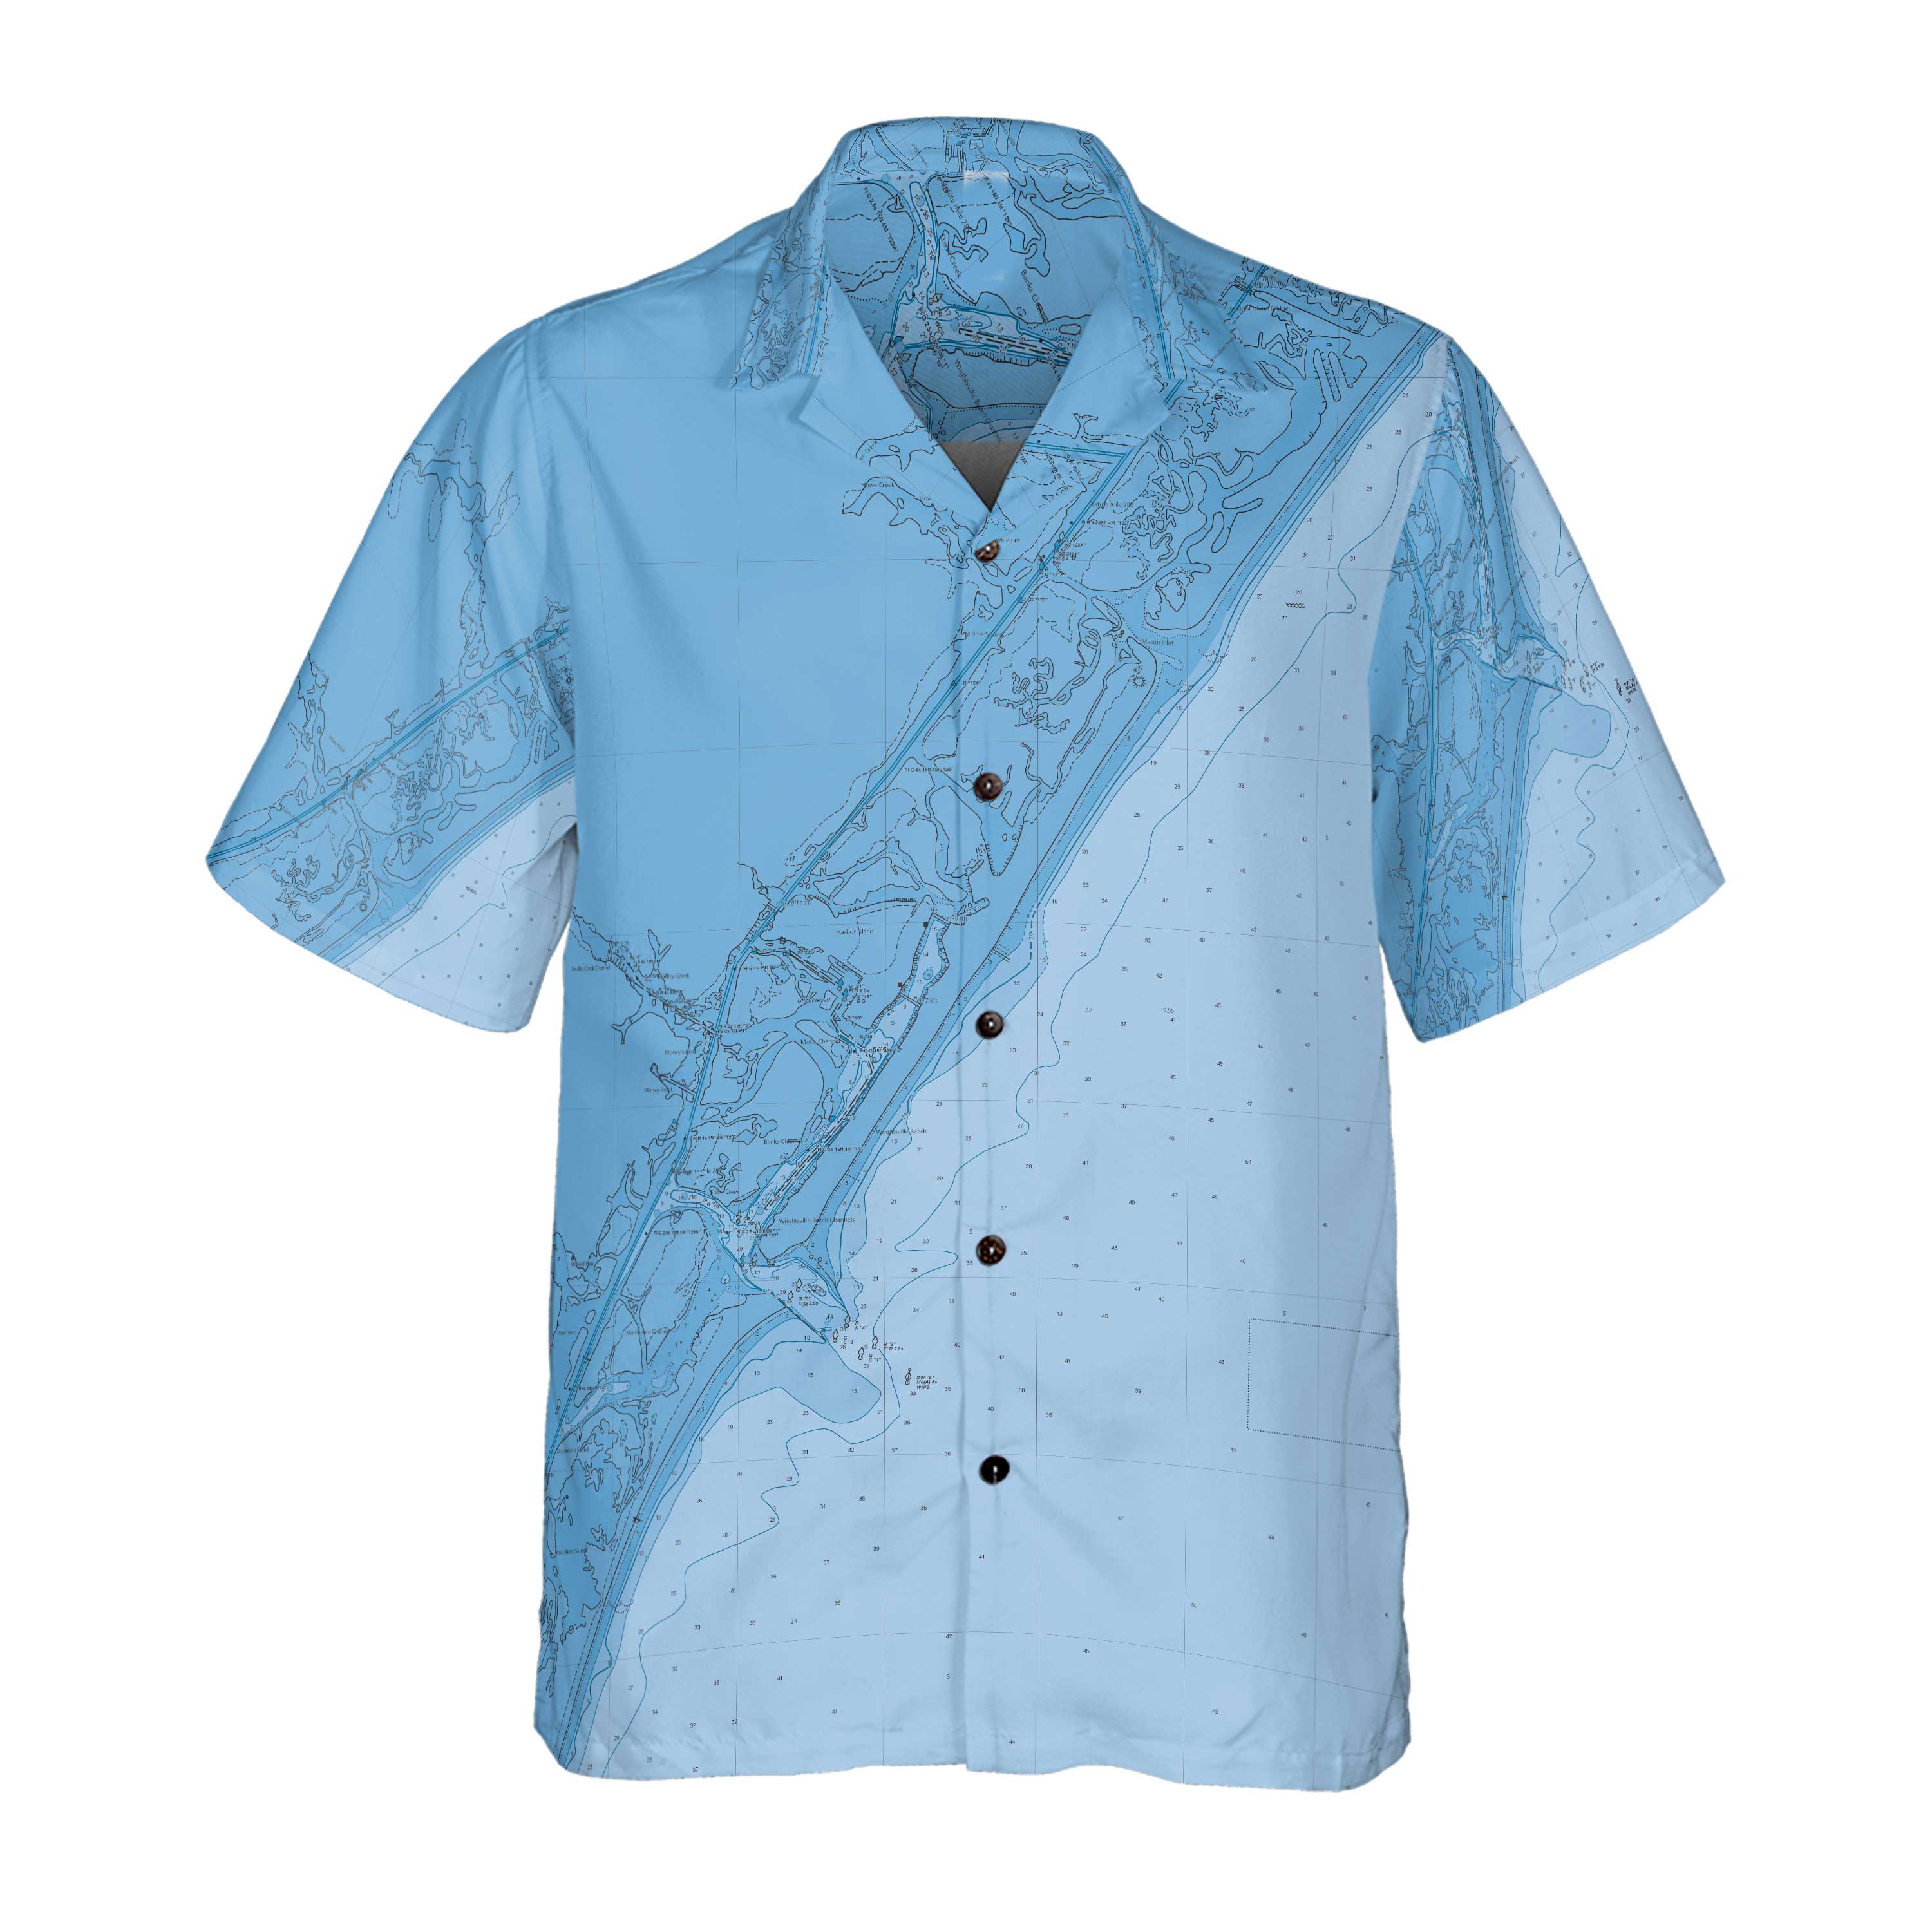 The Wrightsville Beach Blues Coconut Button Camp Shirt